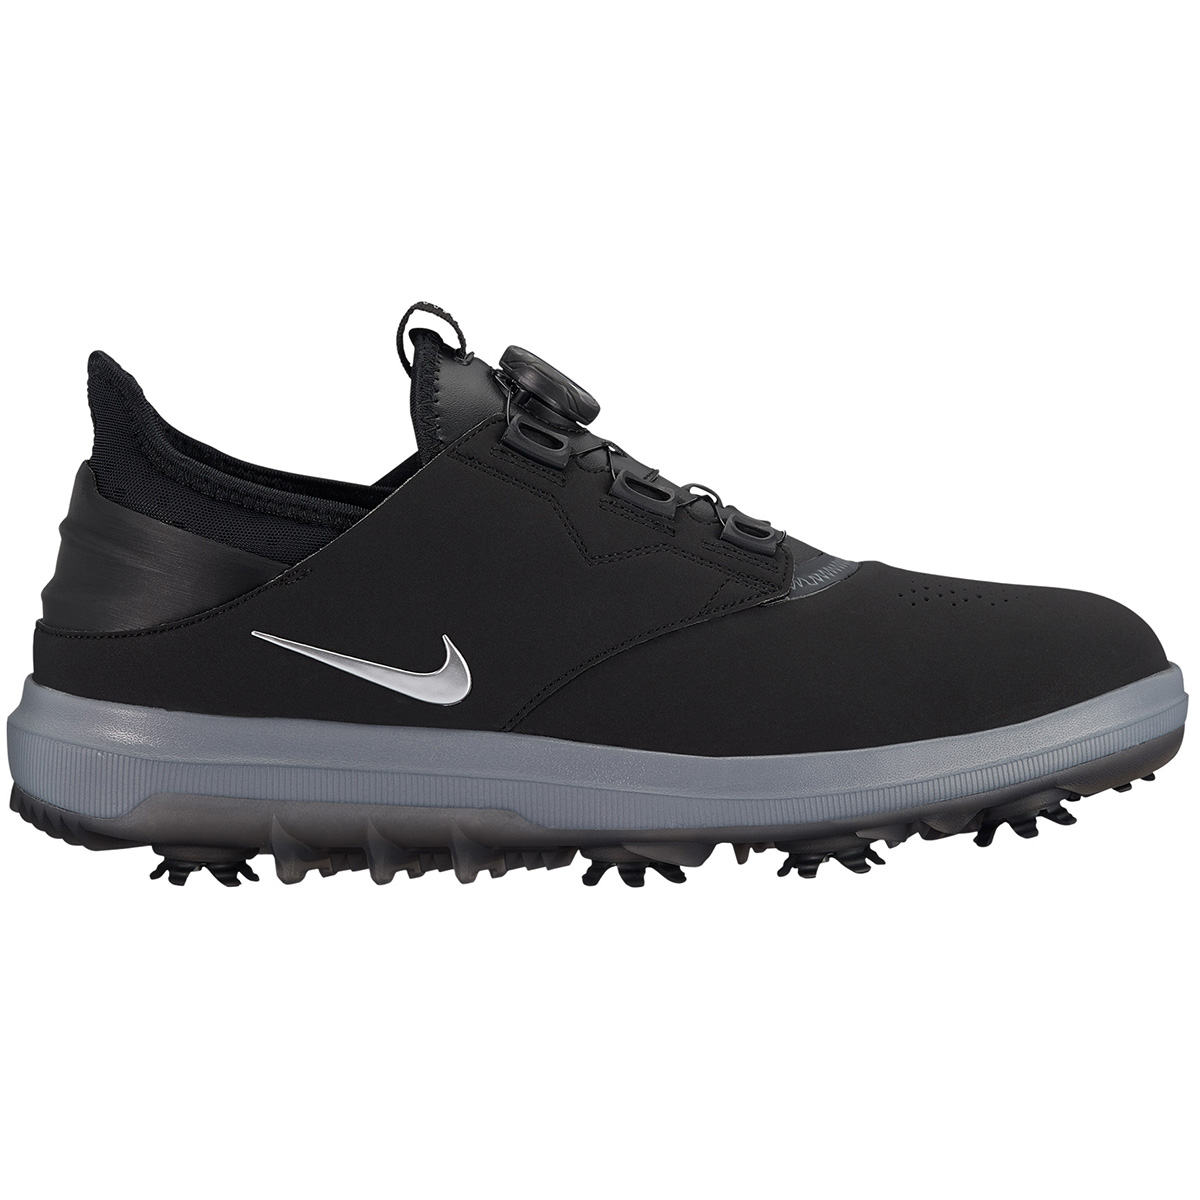 nike golf shoes with boa